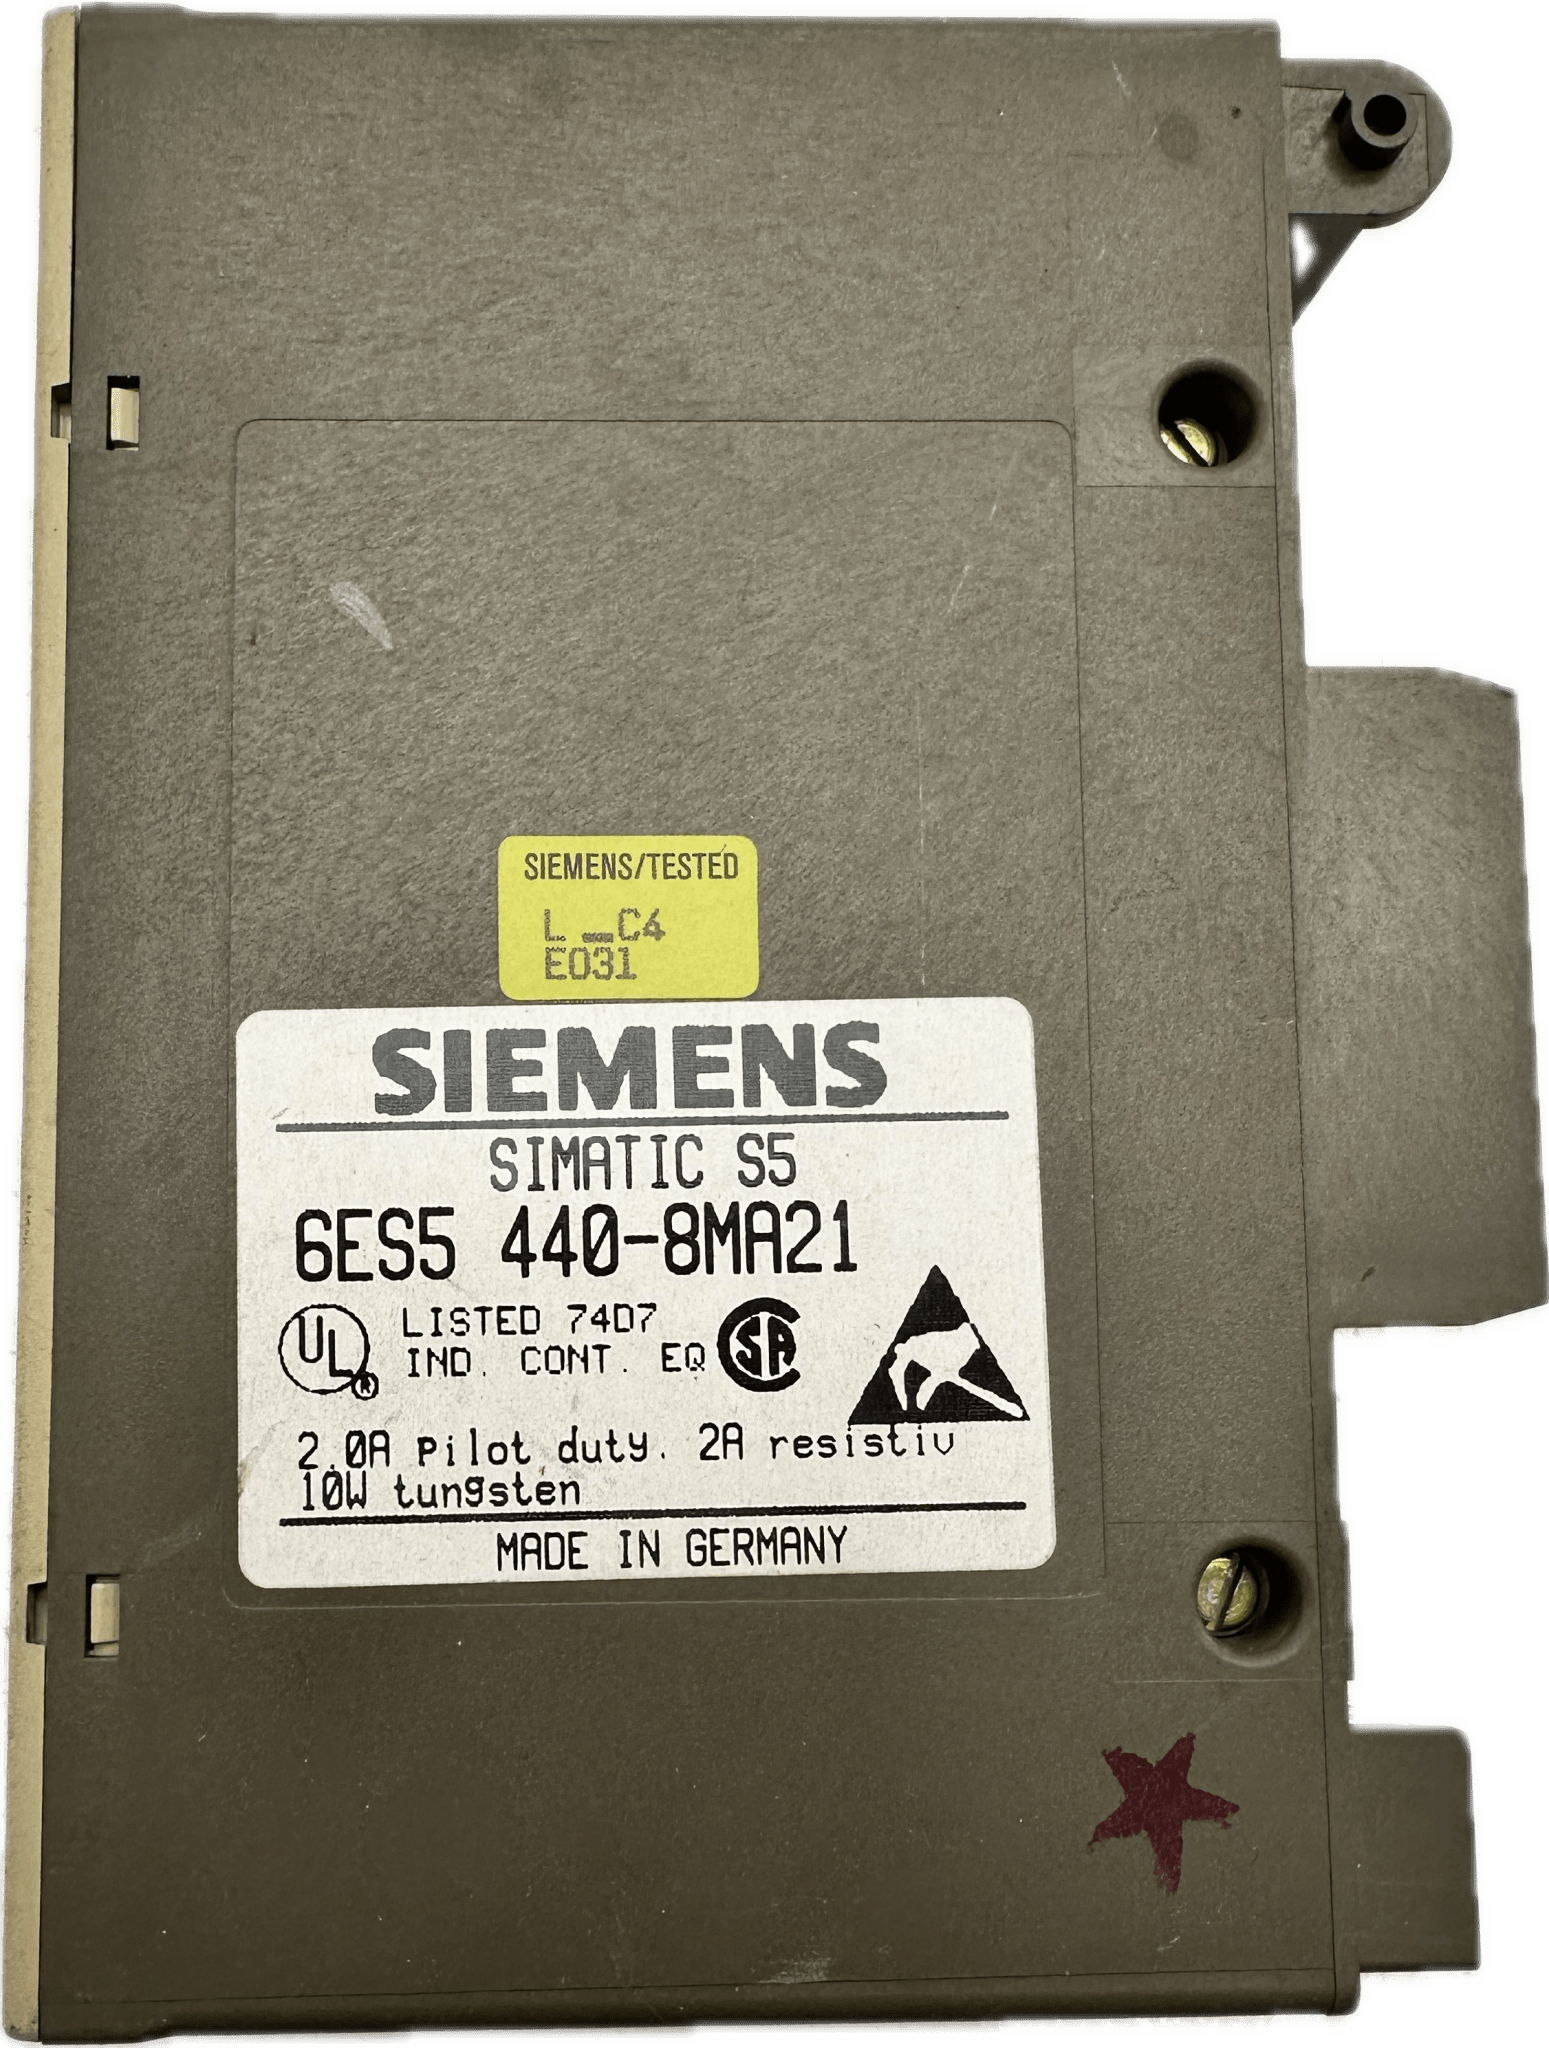 Siemens SIMATIC S5 6ES5440-8MA21 - #product_category# | Klenk Maschinenhandel